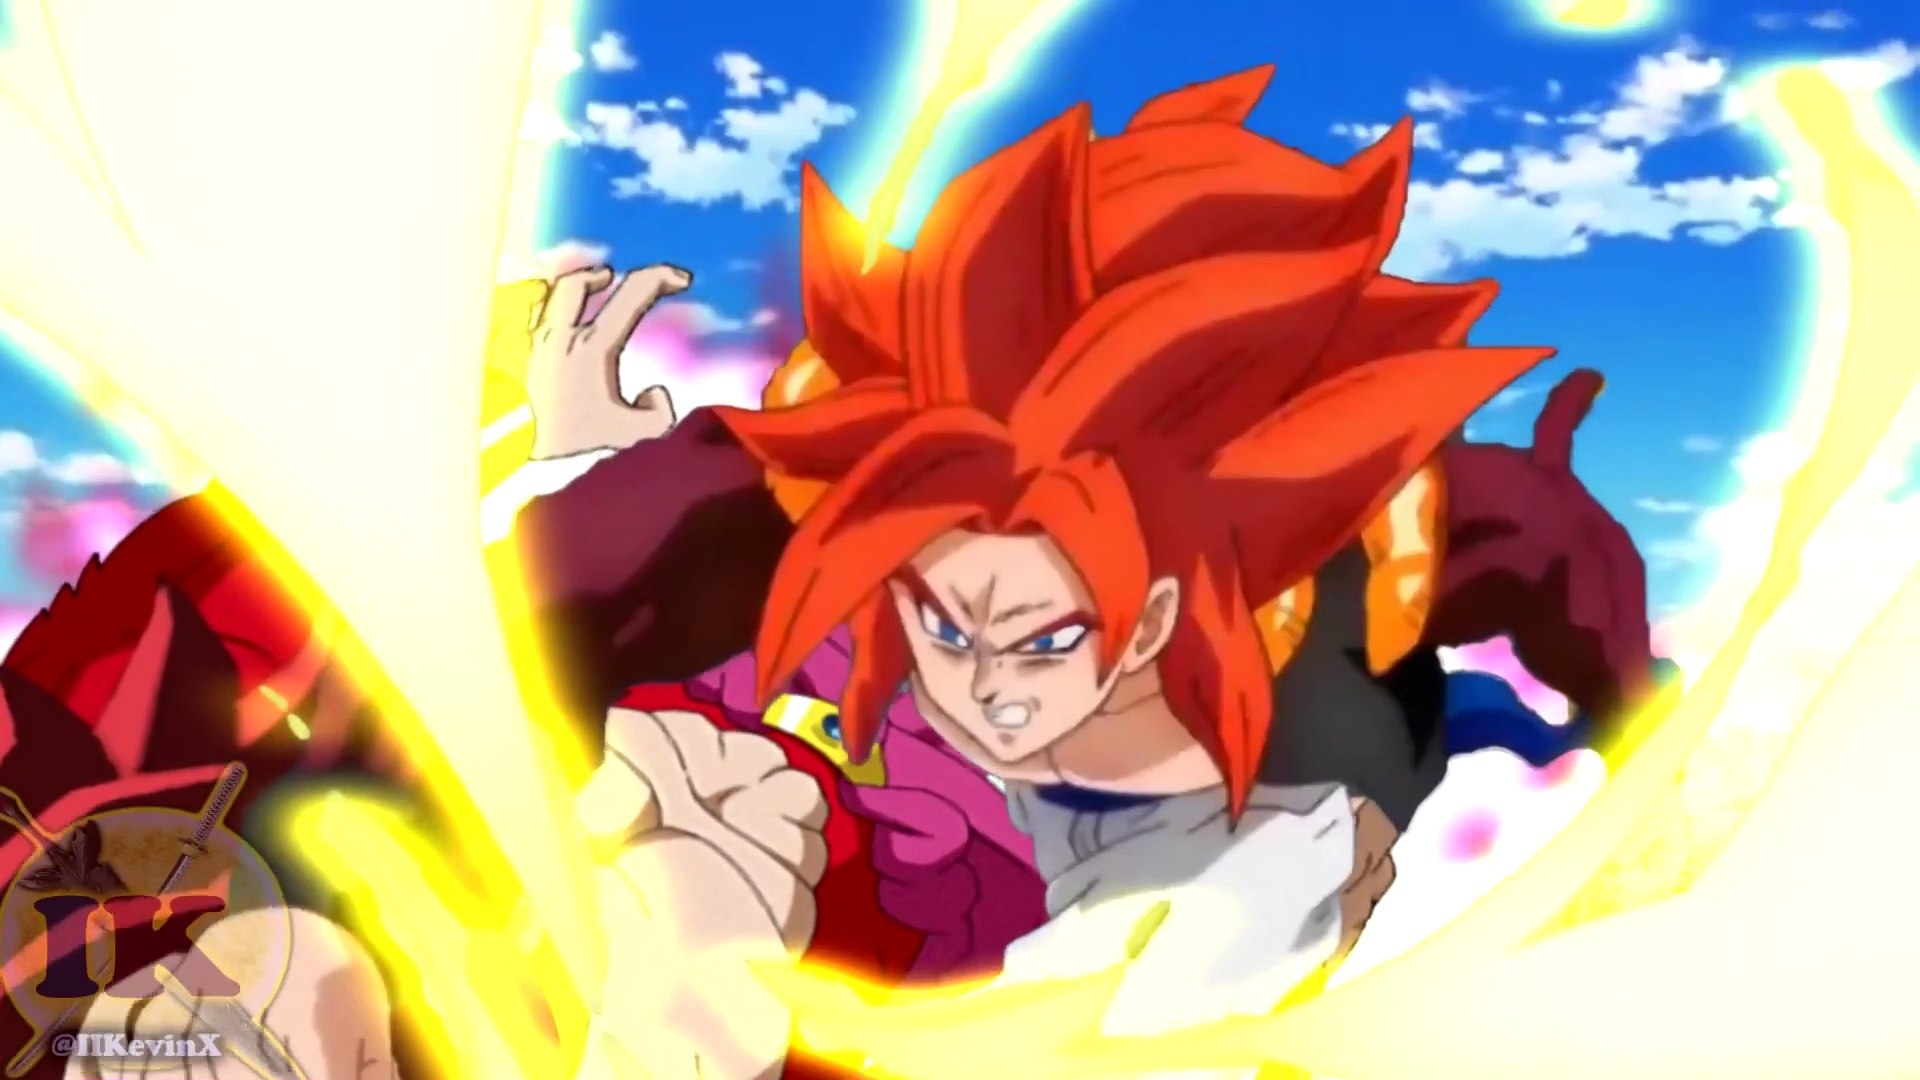 Dragon Ball FighterZ - Gogeta and Broly (DBS) Dramatic Finish